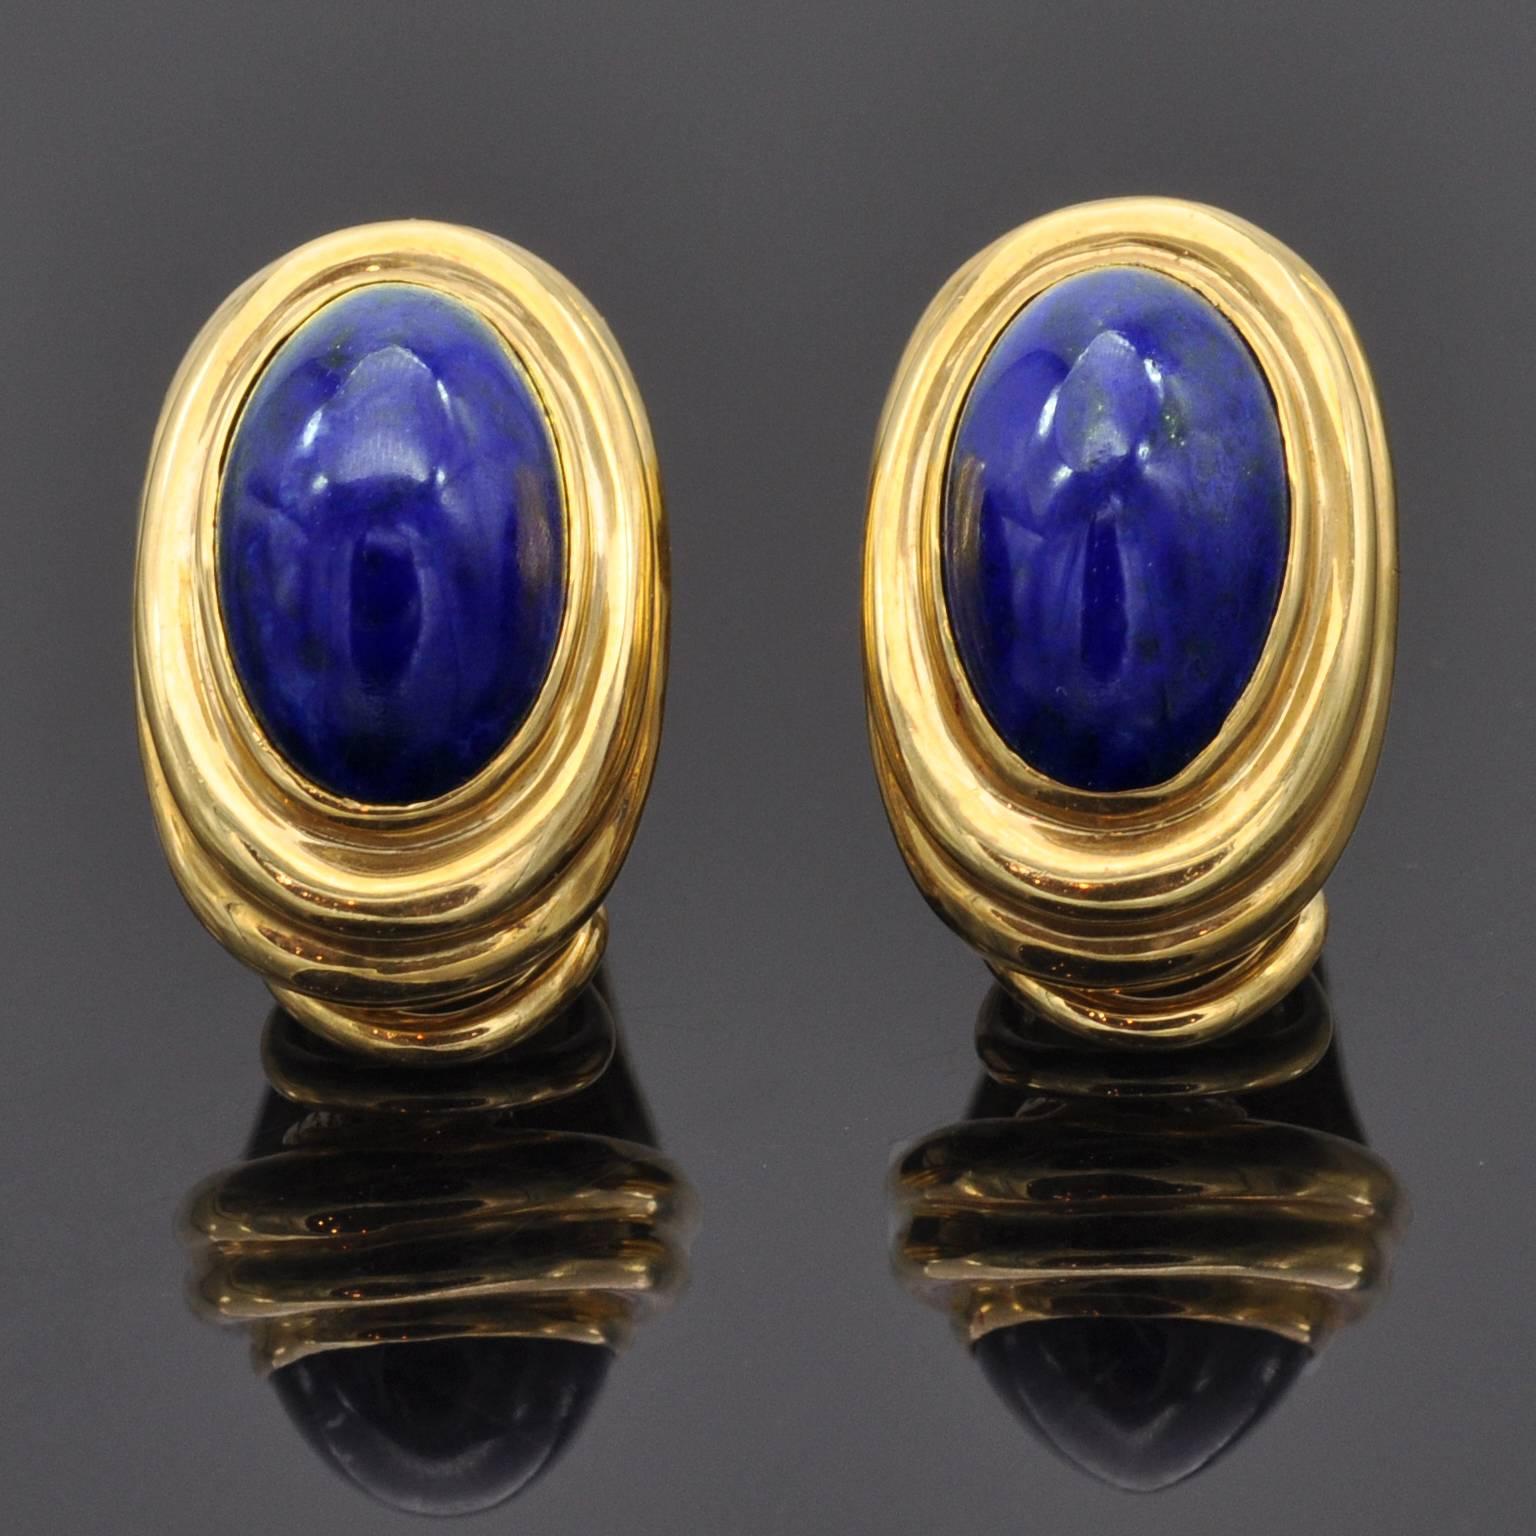 Hammered and polished 18kt gold with a bezel set top quality vivid blue lapis lazuli . These earrings has definitely a simple yet strong design.
For pierced or non pierced ear lobes.

A matching ring is available : ref LU47232773303